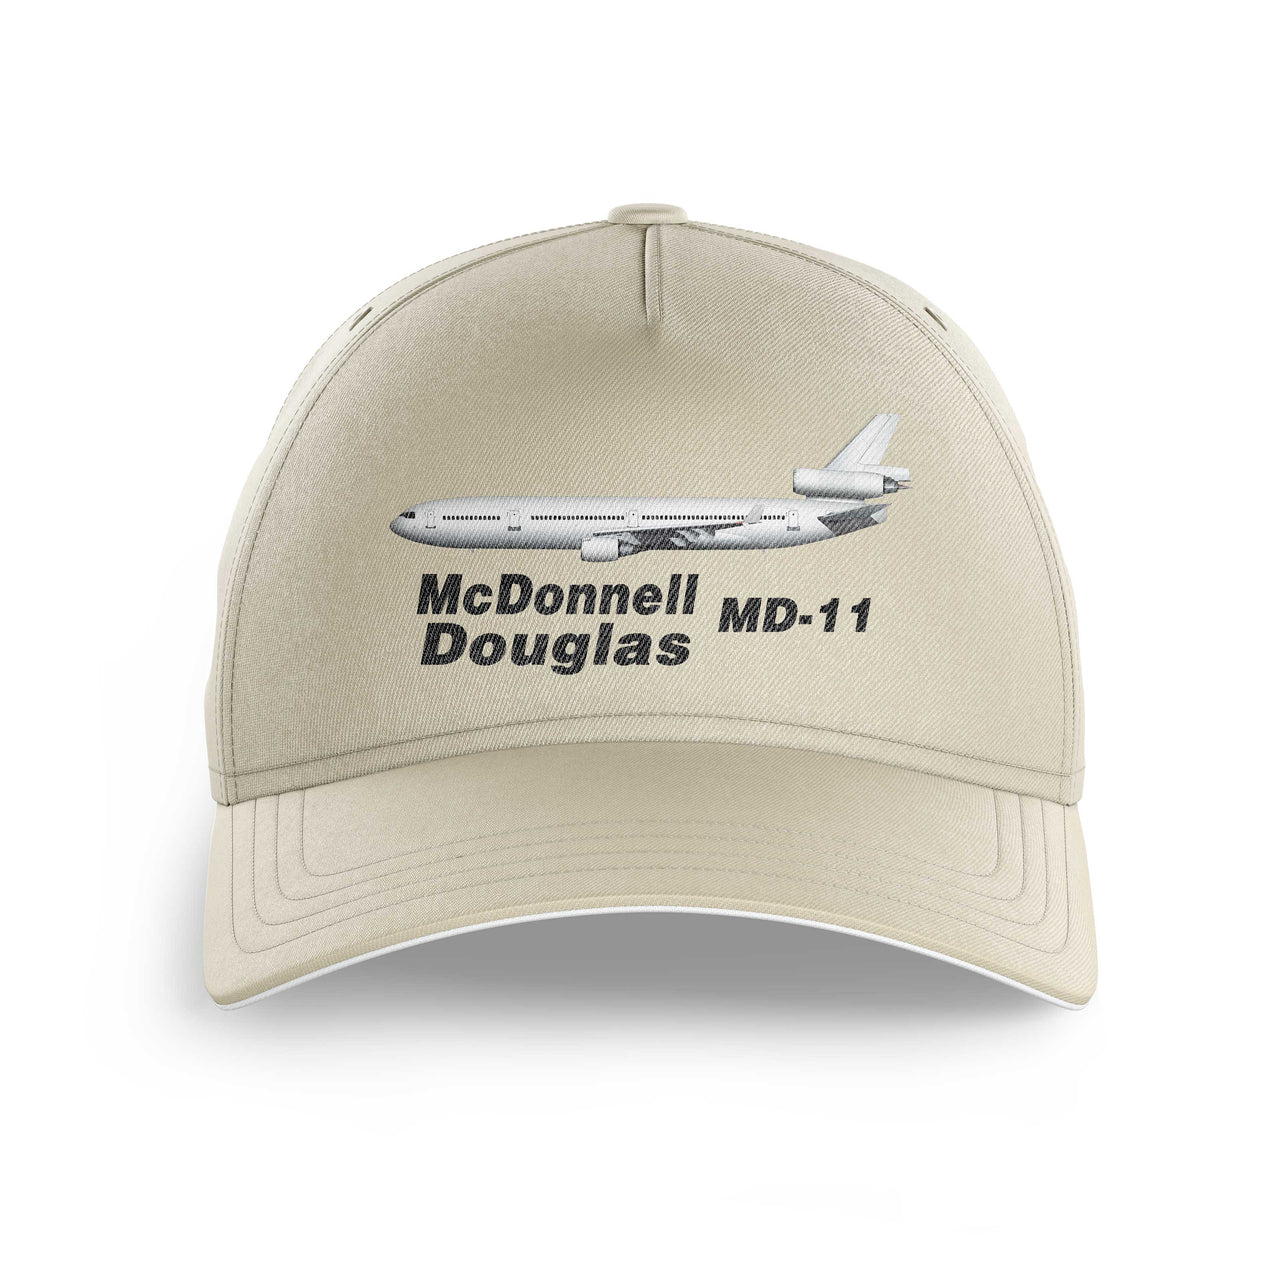 The McDonnell Douglas MD-11 Printed Hats